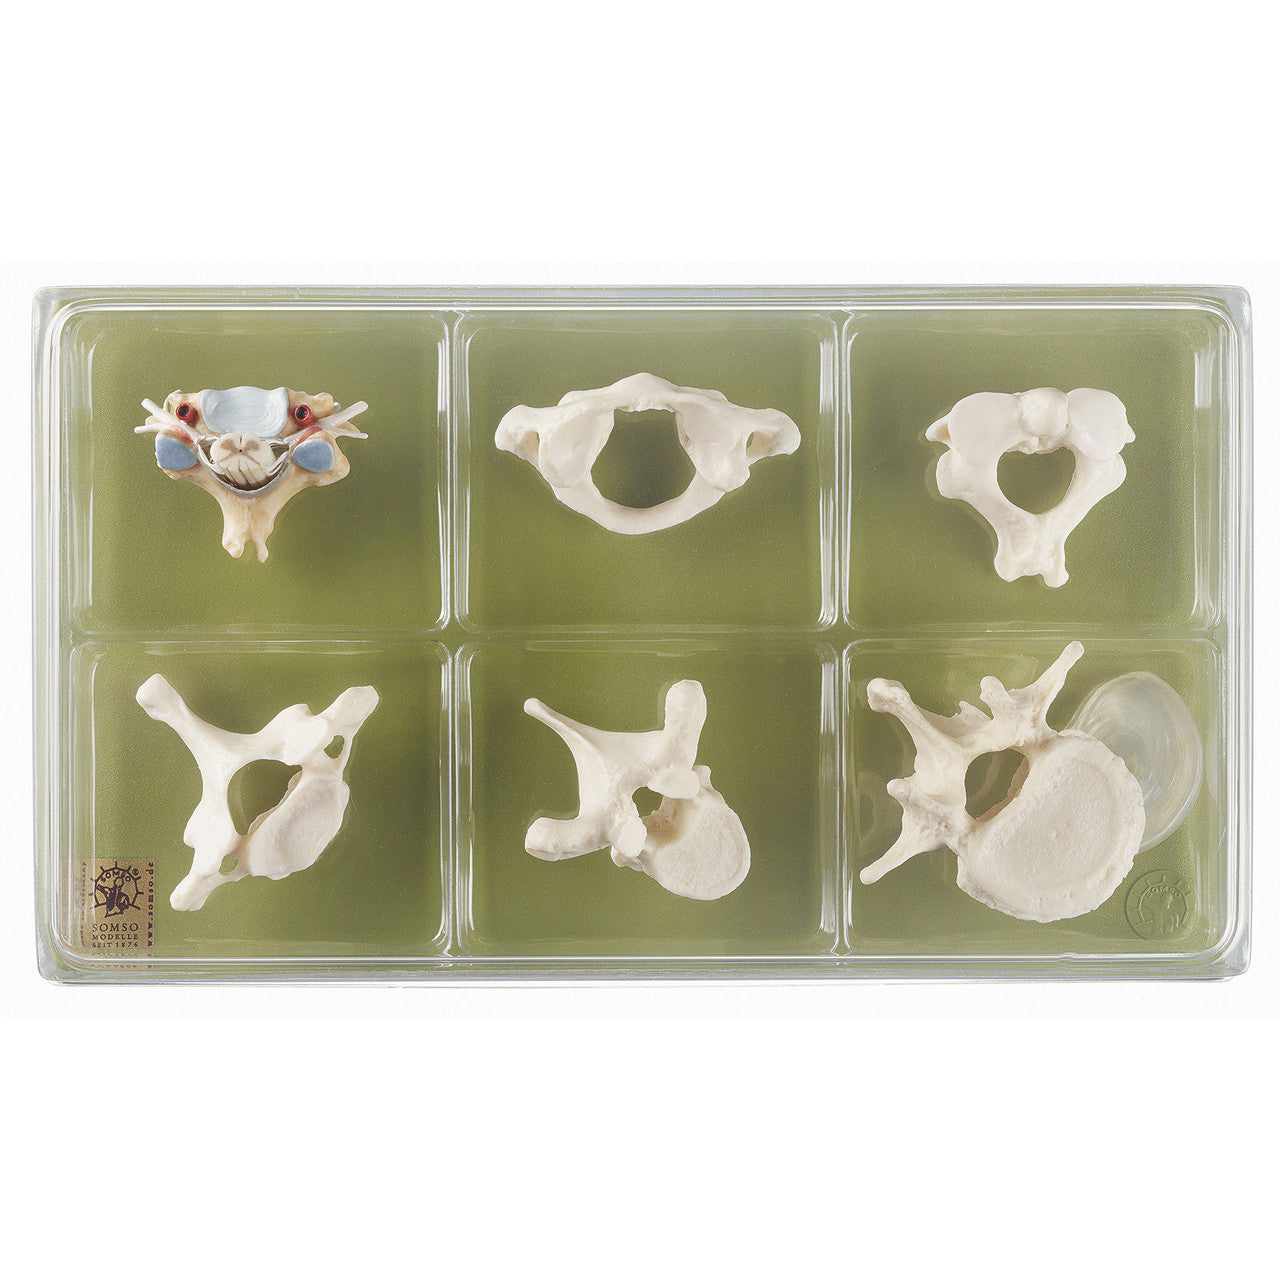 Collection Case “Vertebrae and Spinal Cord“ Somso Qs 54